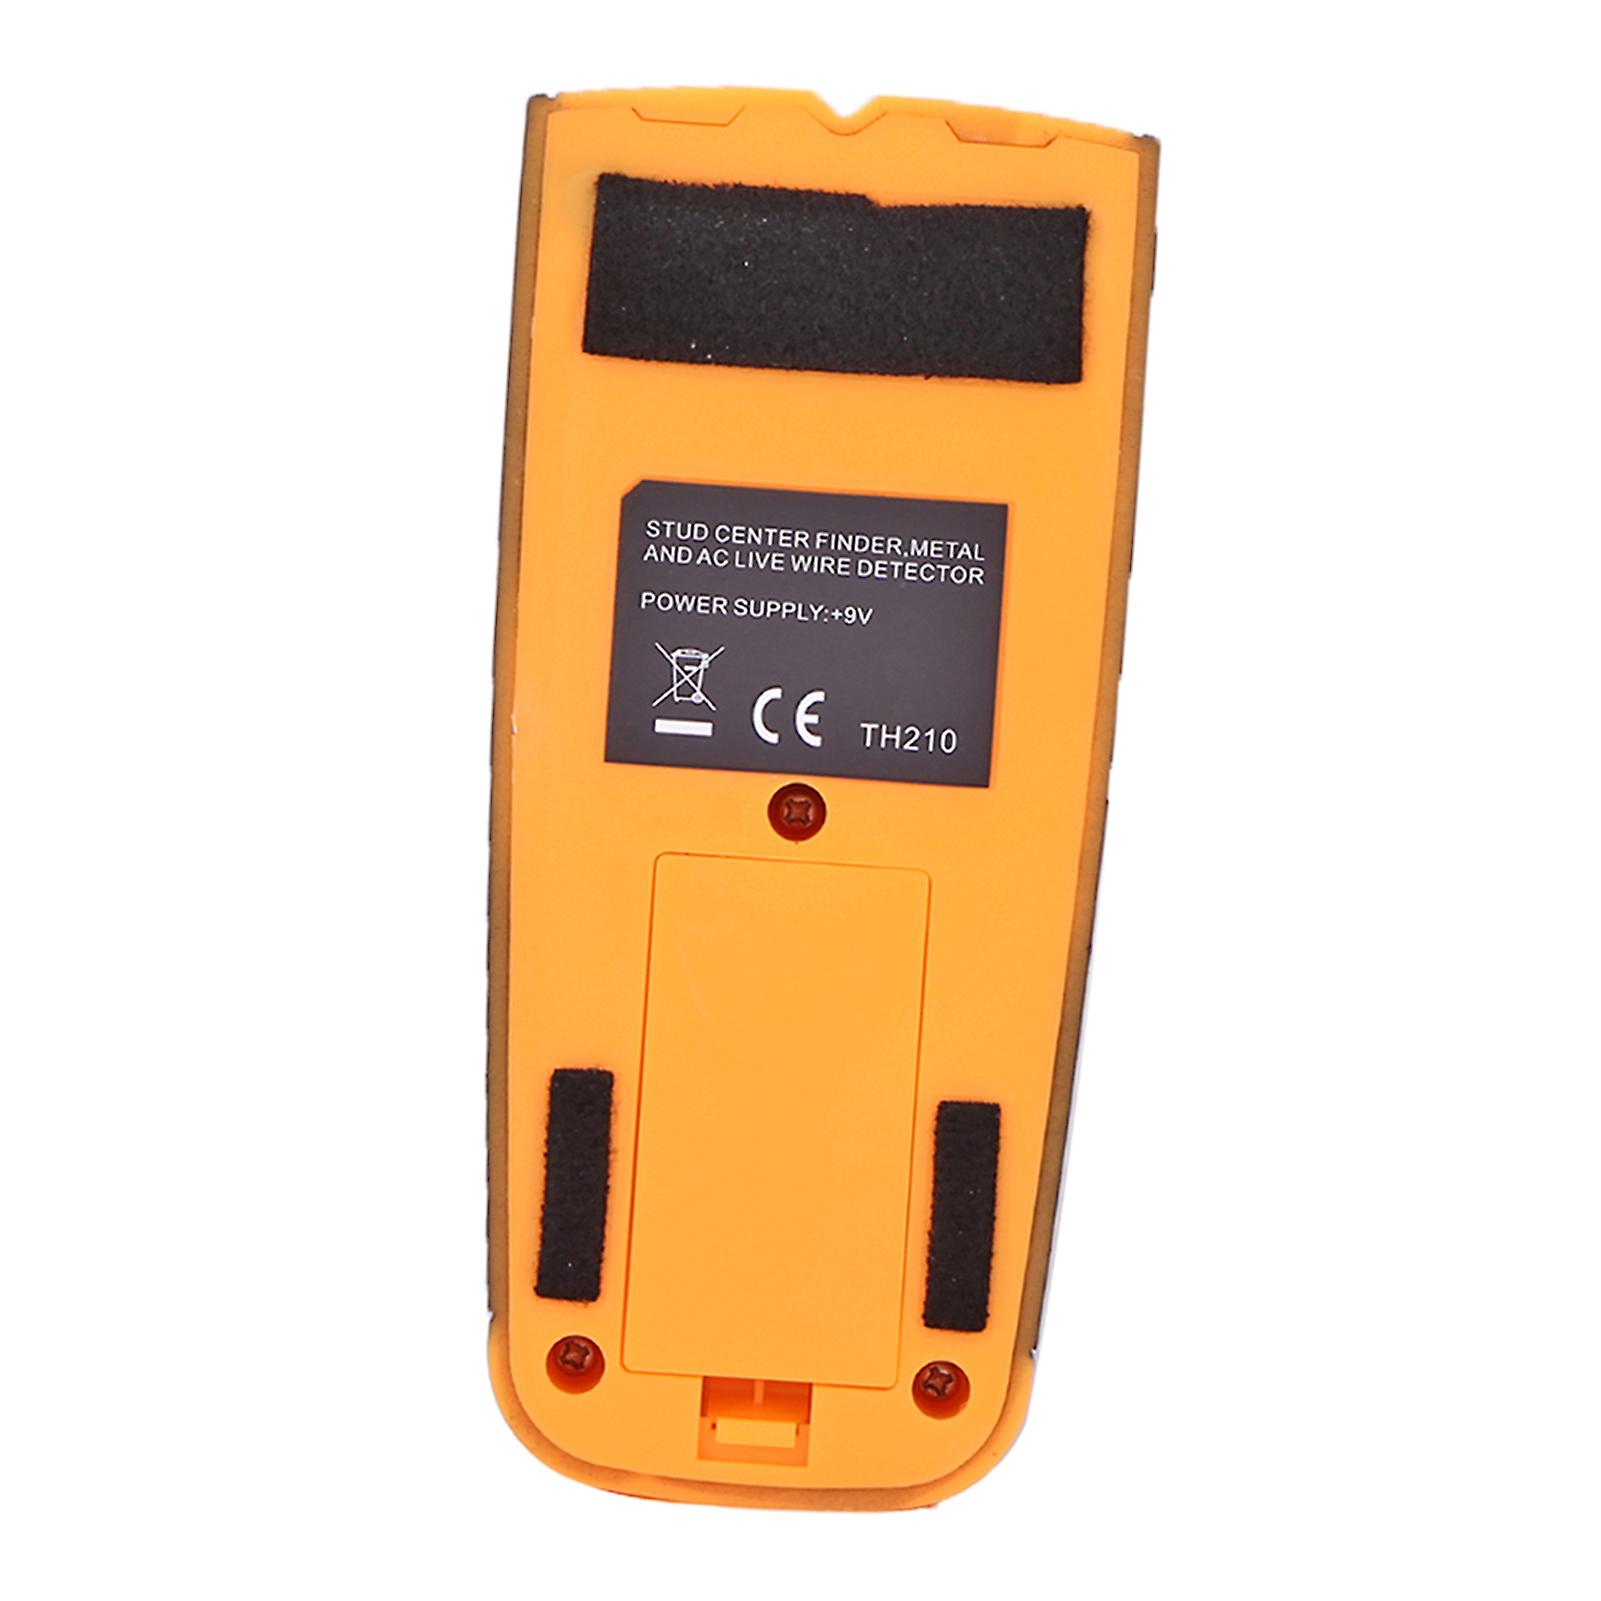 3 In1 Stud Finder Wall Detector - Electronic Stud Sensor Wall Scanner Center Finding - With Battery Lcd Display For Wood Metal Studs Ac Wire Detection